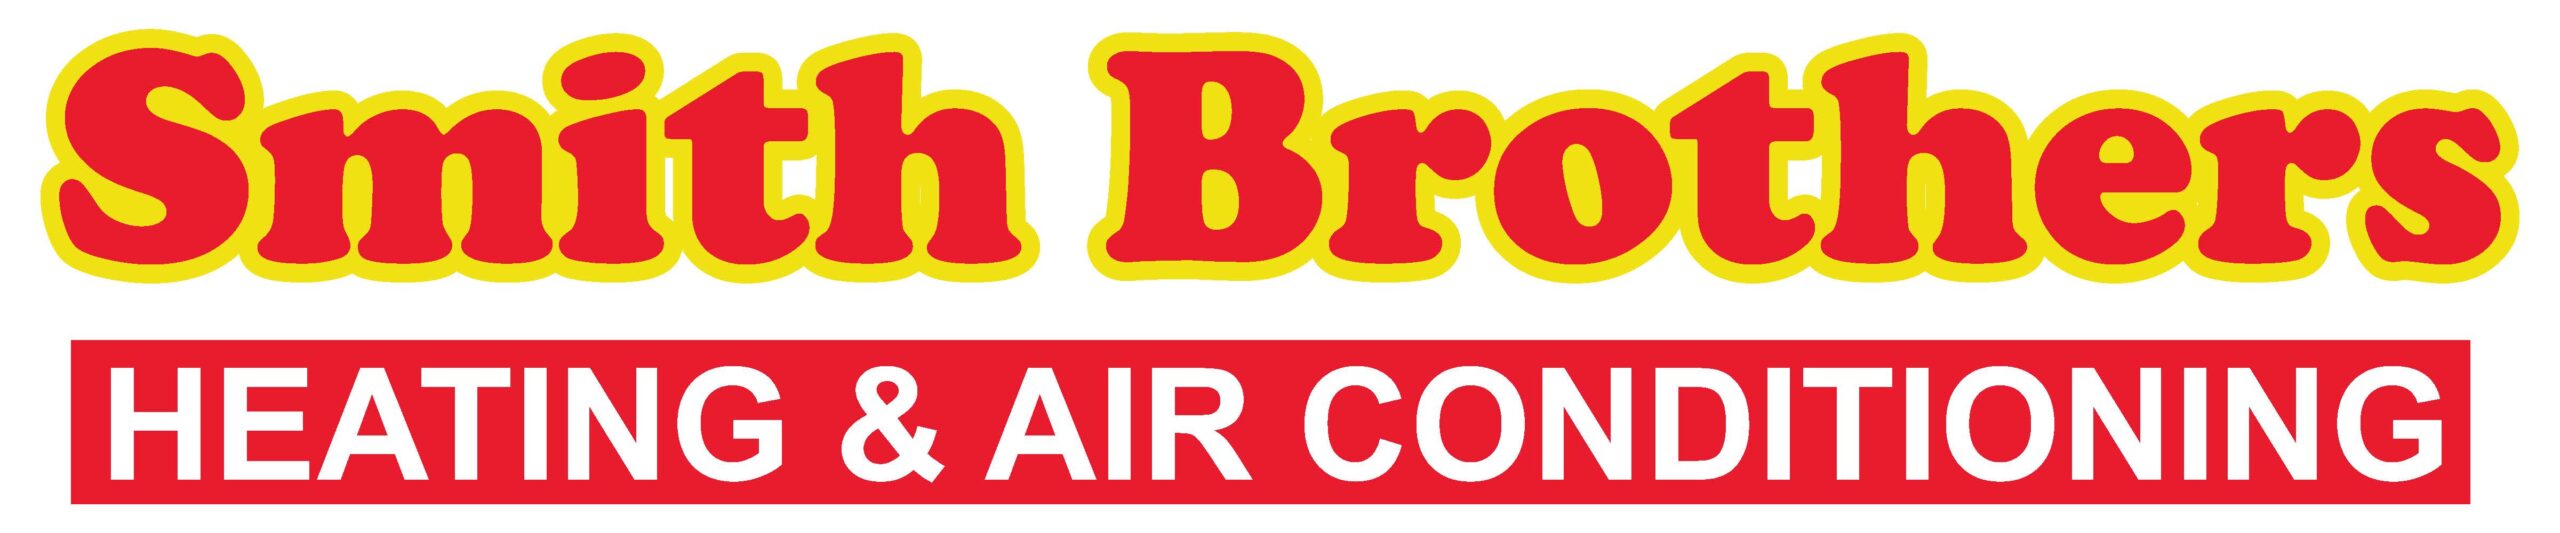 Smith Brothers Heating & Air Conditioning